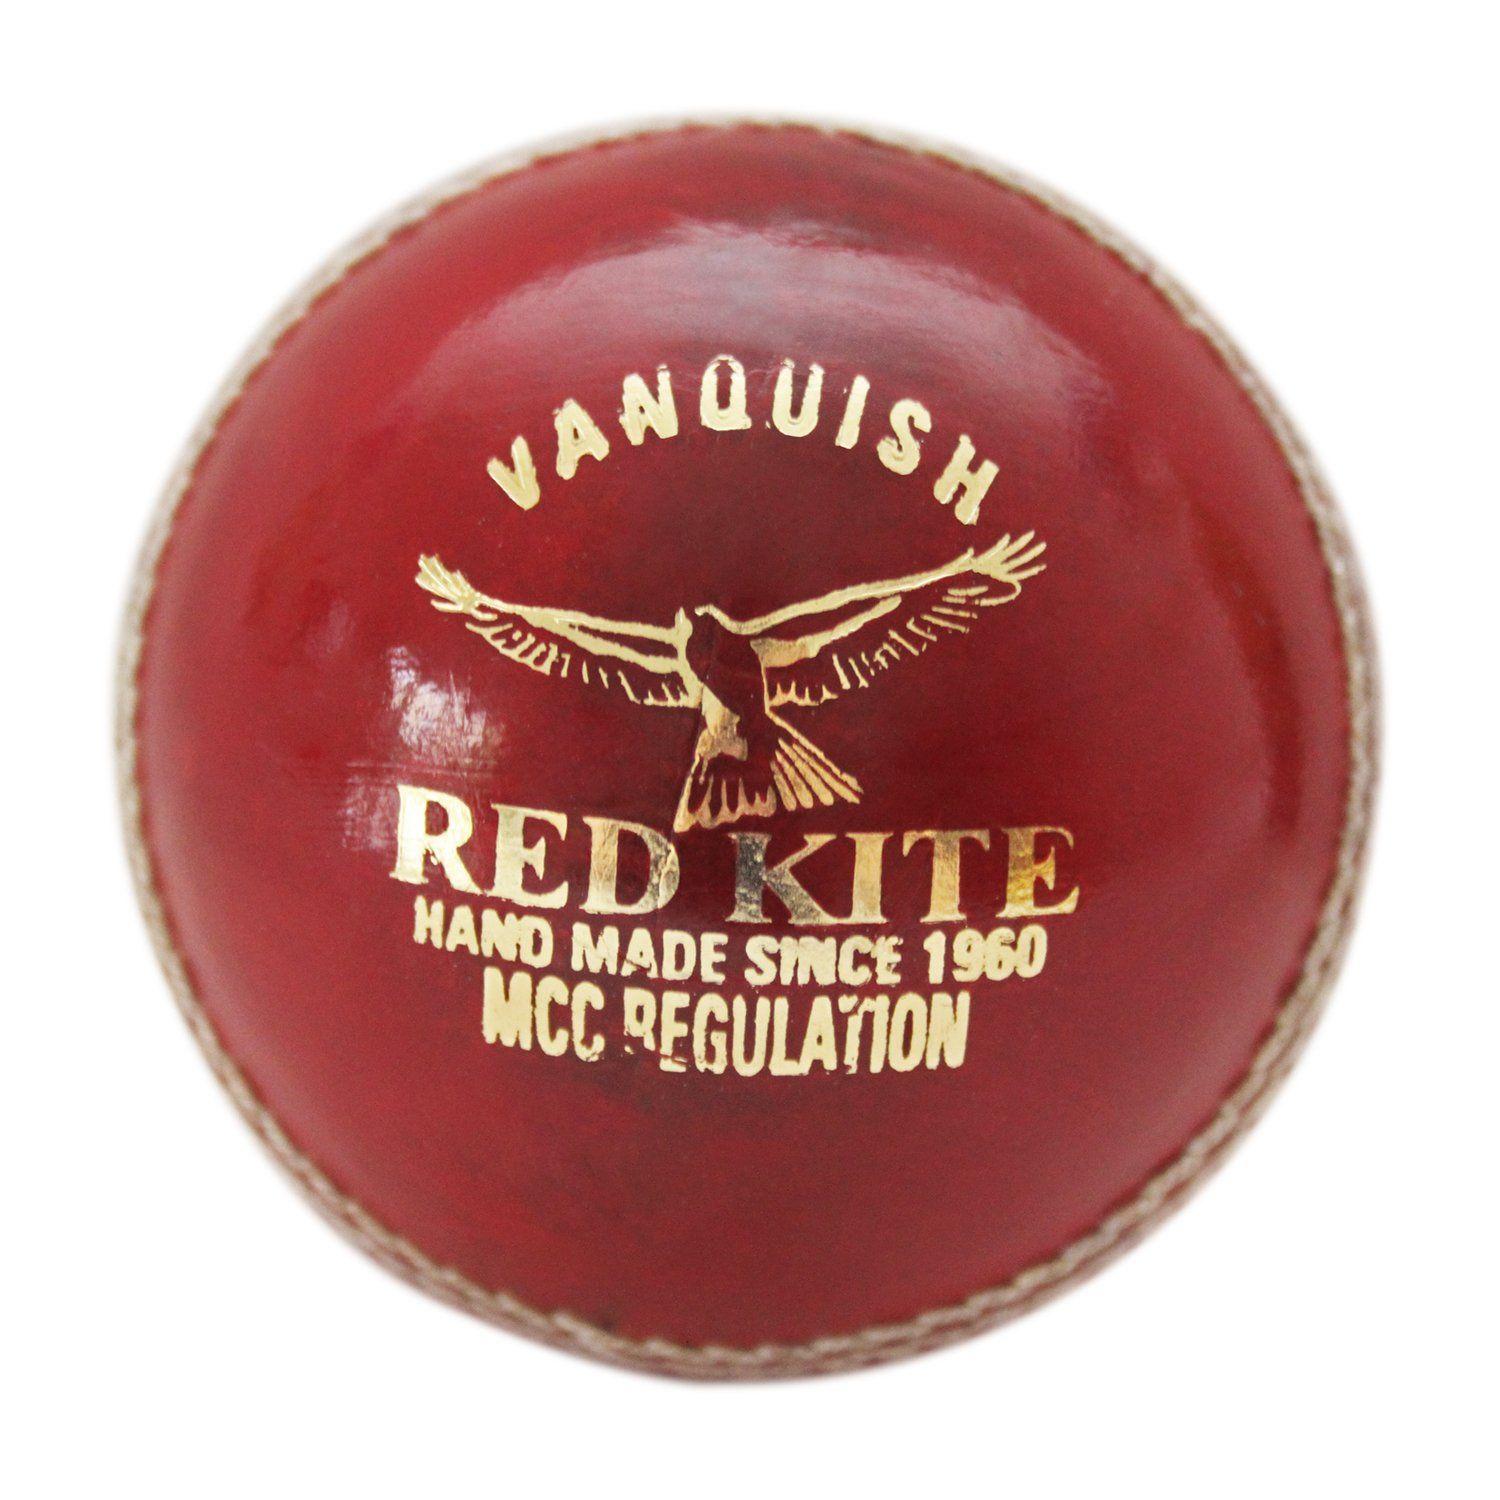 Red Hands On Ball Logo - Vanquish - Finest premium red leather cricket ball made from four ...